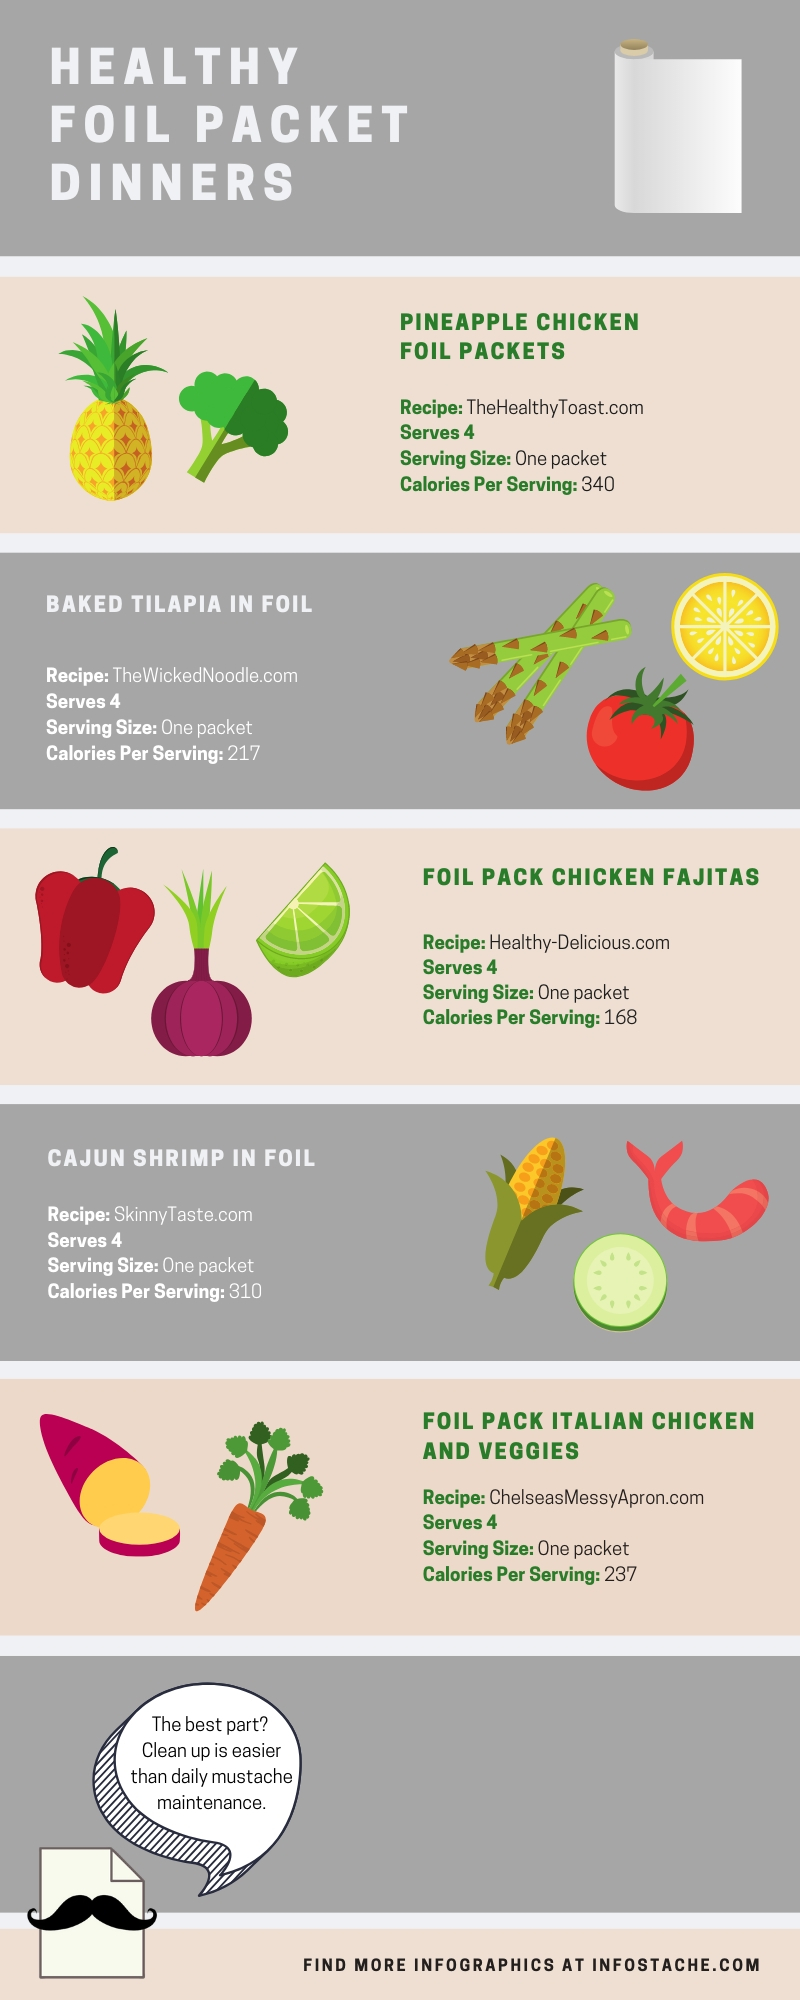 Healthy Foil Packet Dinners - Infographic